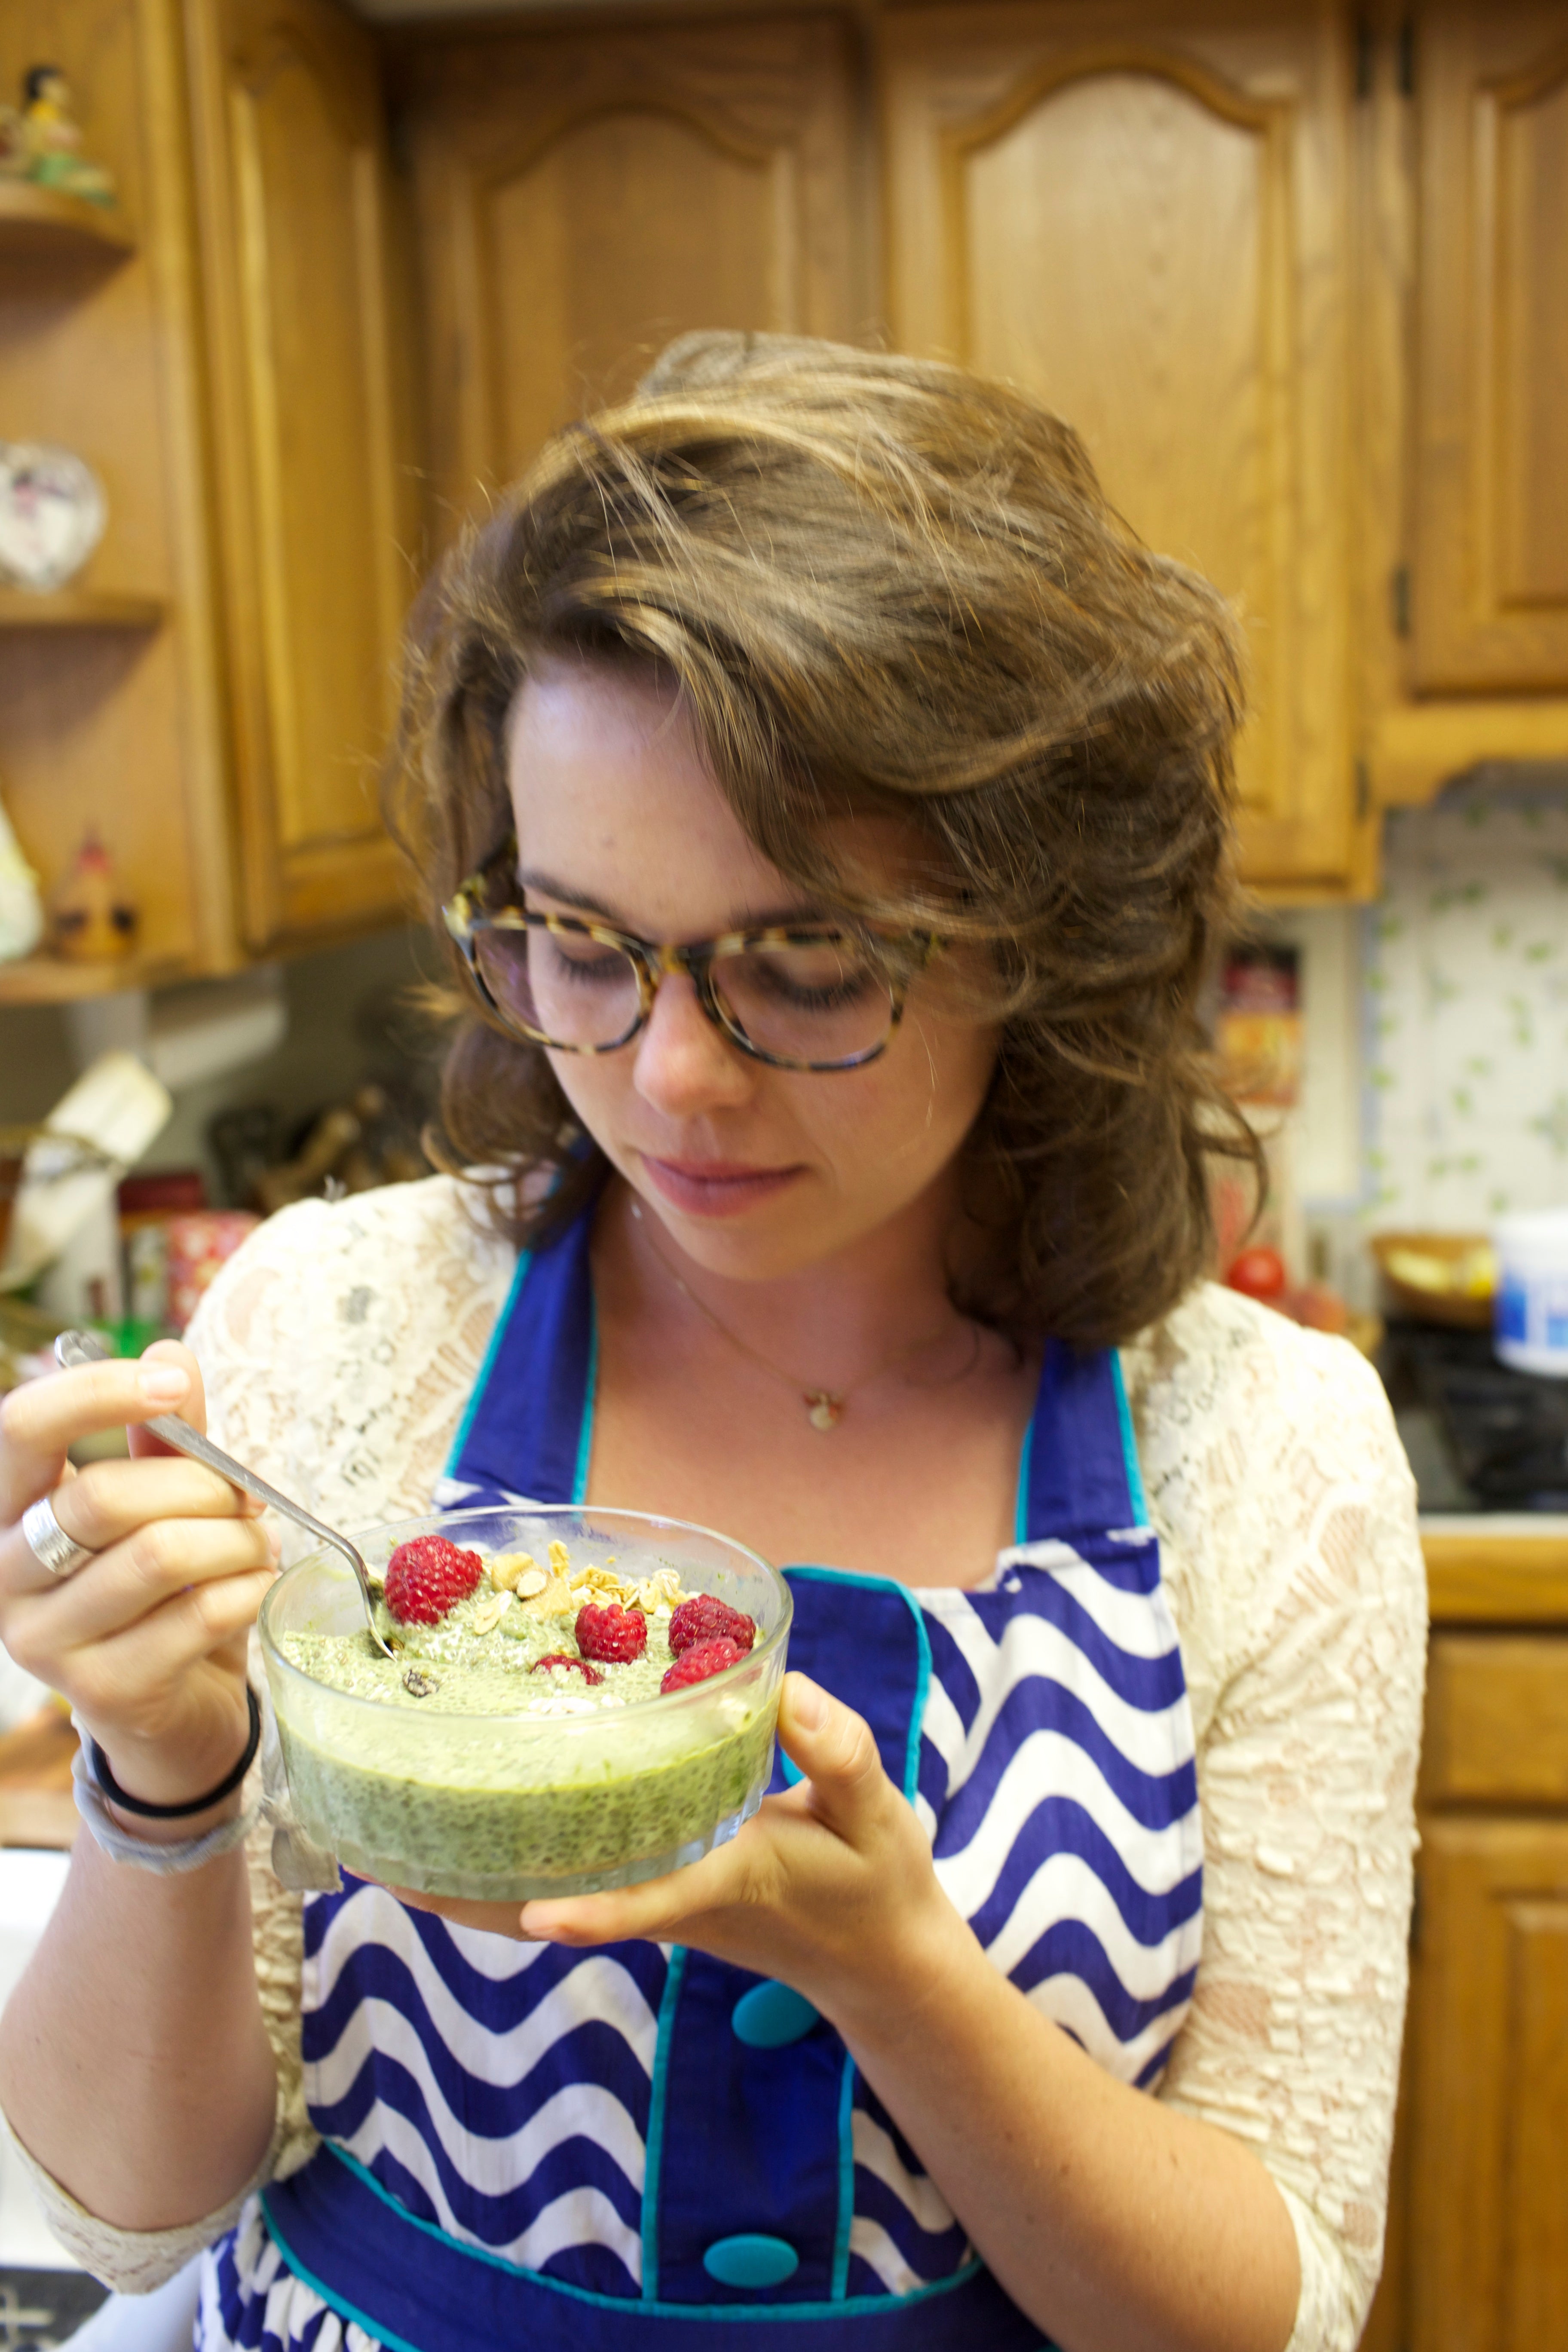 Lauren with Matcha Chia Seed Pudding